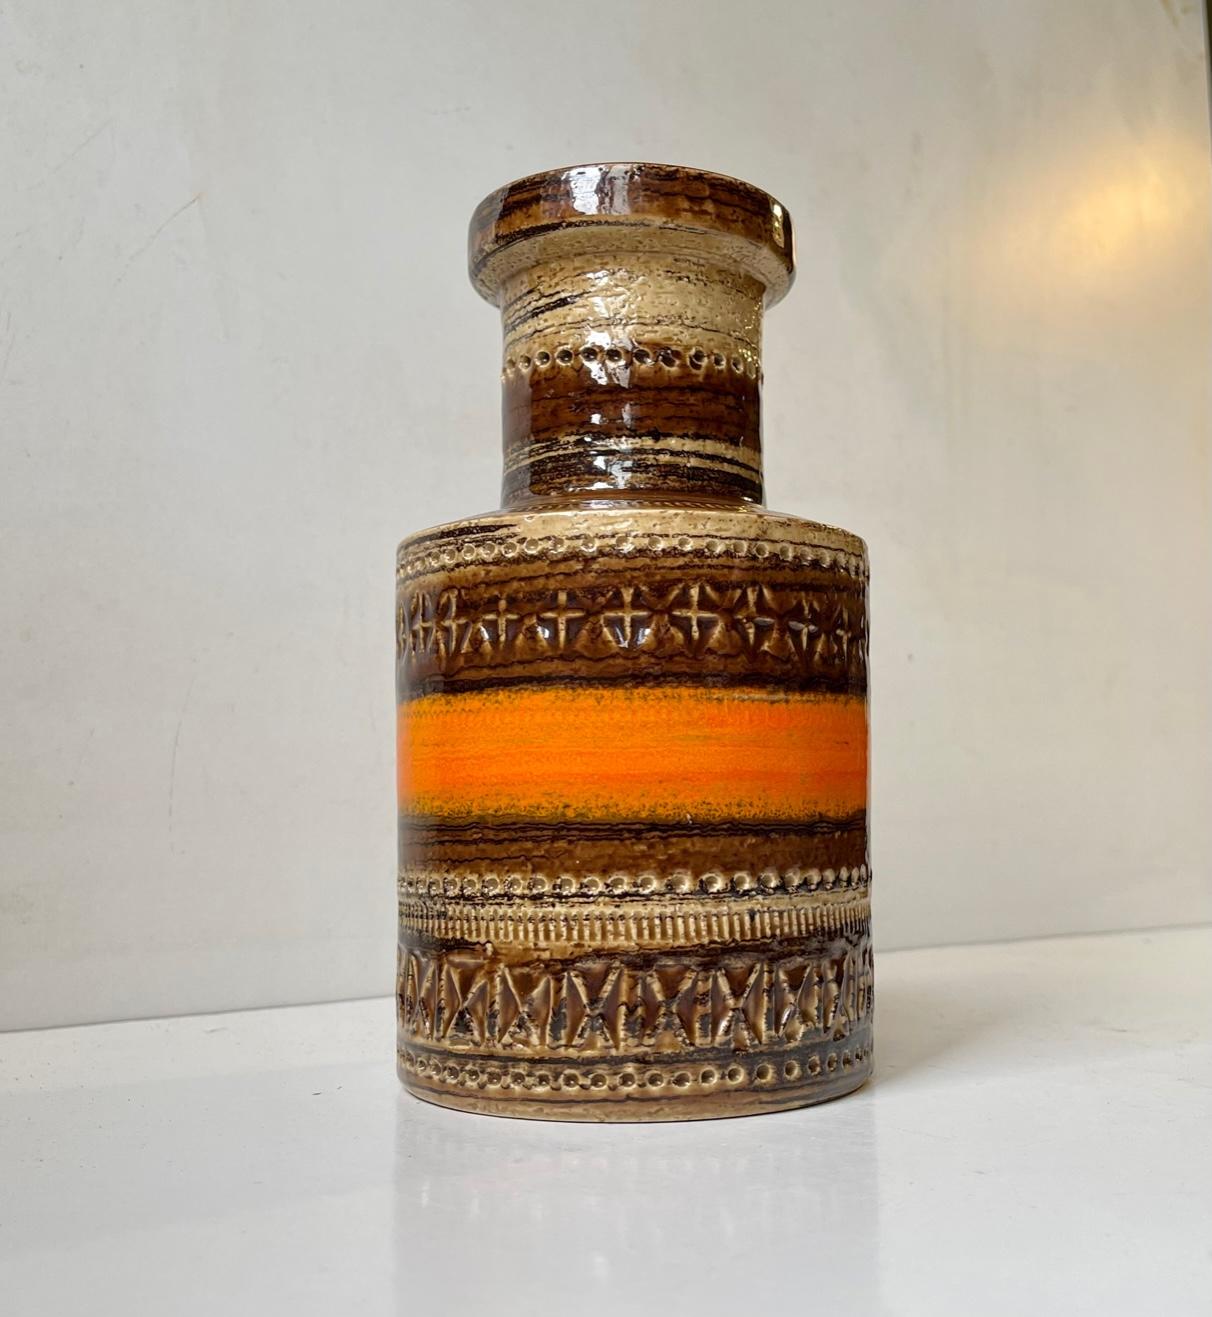 Aldo Londi designed this eye-catching stoneware vase. Its distinct decor is called Sahara and is executed in earthy, brown and vibrant orange glazes upon geometric patterns/symbols. It was manufactured in Italy by Bitossi for Raymor during the